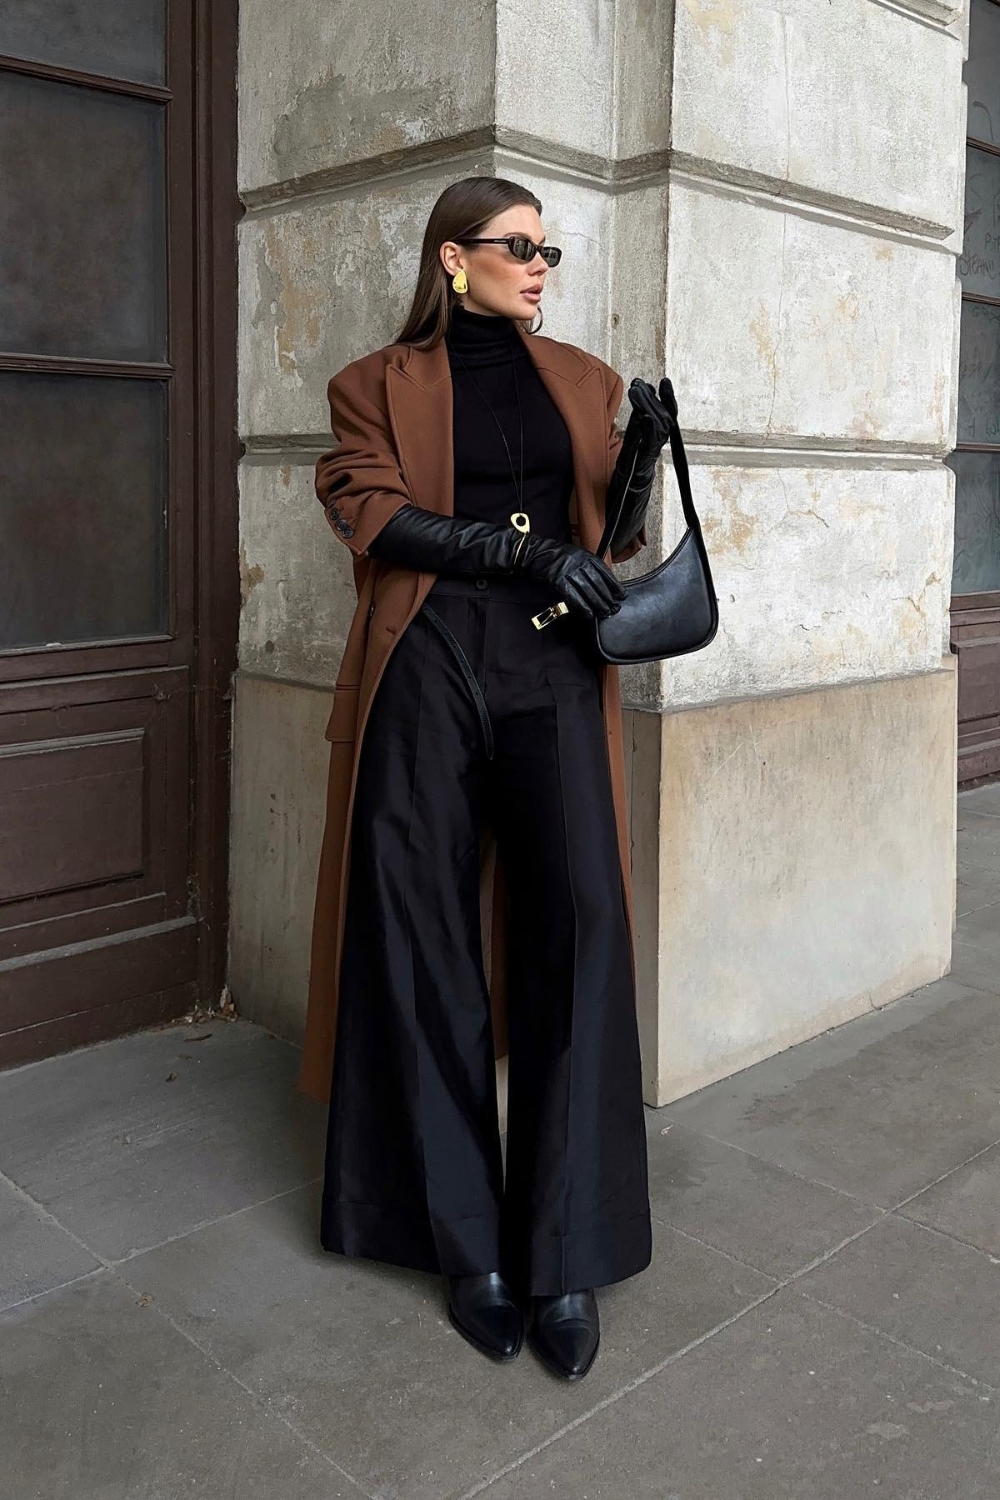 Black Sweater with black wide leg pants outfit